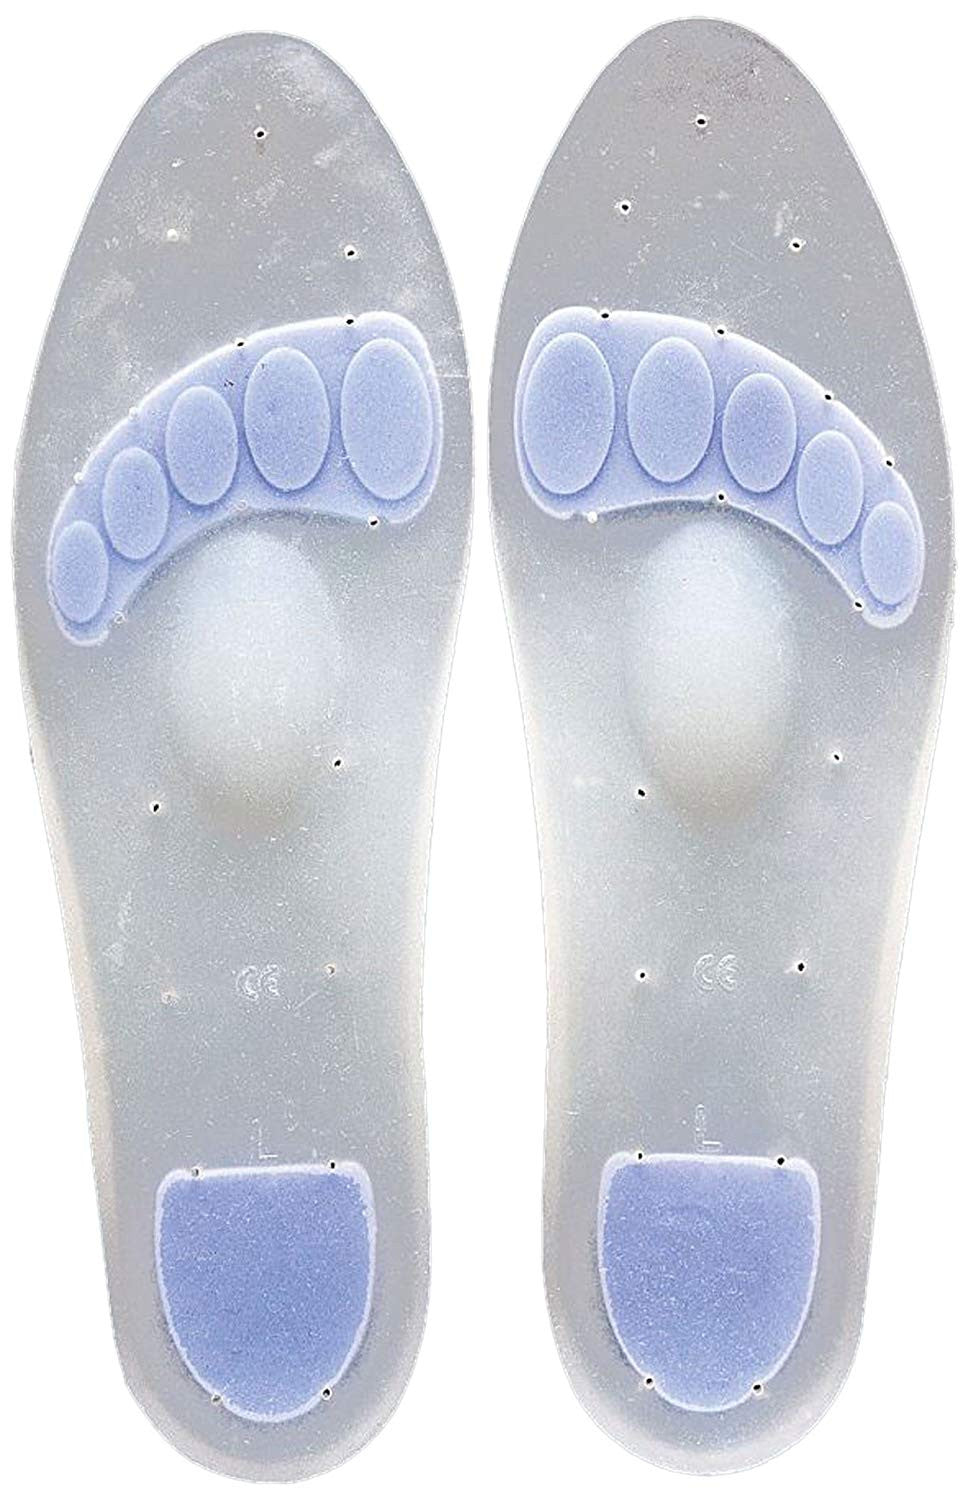 TYNOR INSOLE FULL SILICON PAIR-K01 L